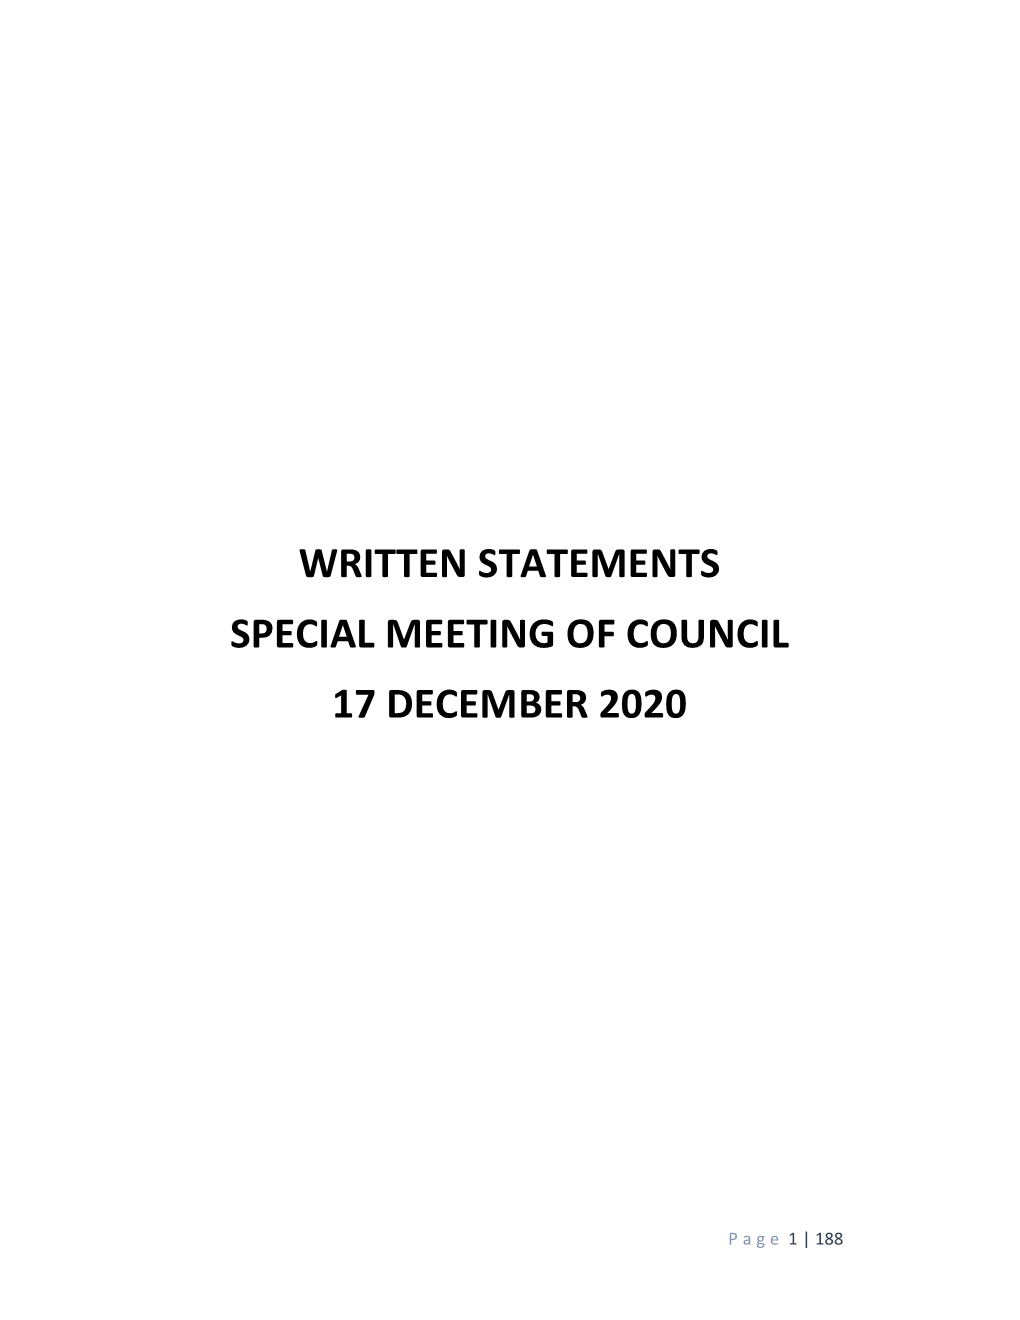 Written Statements Special Meeting of Council 17 December 2020